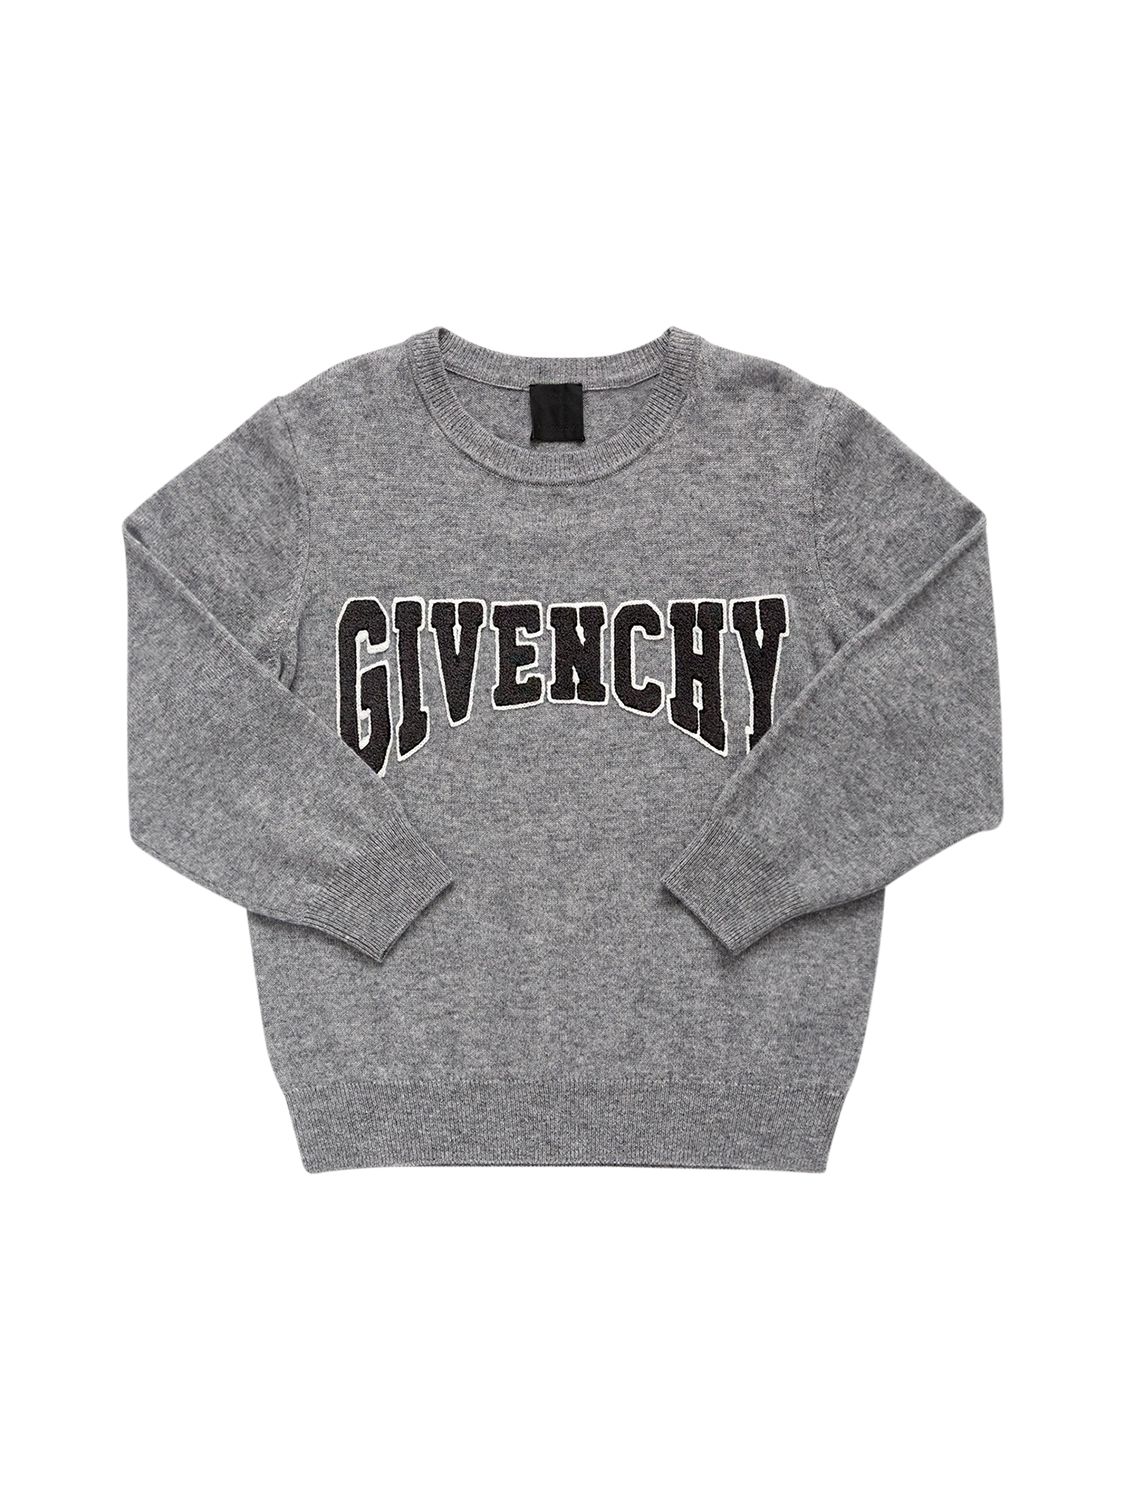 Givenchy Wool & Cashmere Blend Knit Sweater In Grey